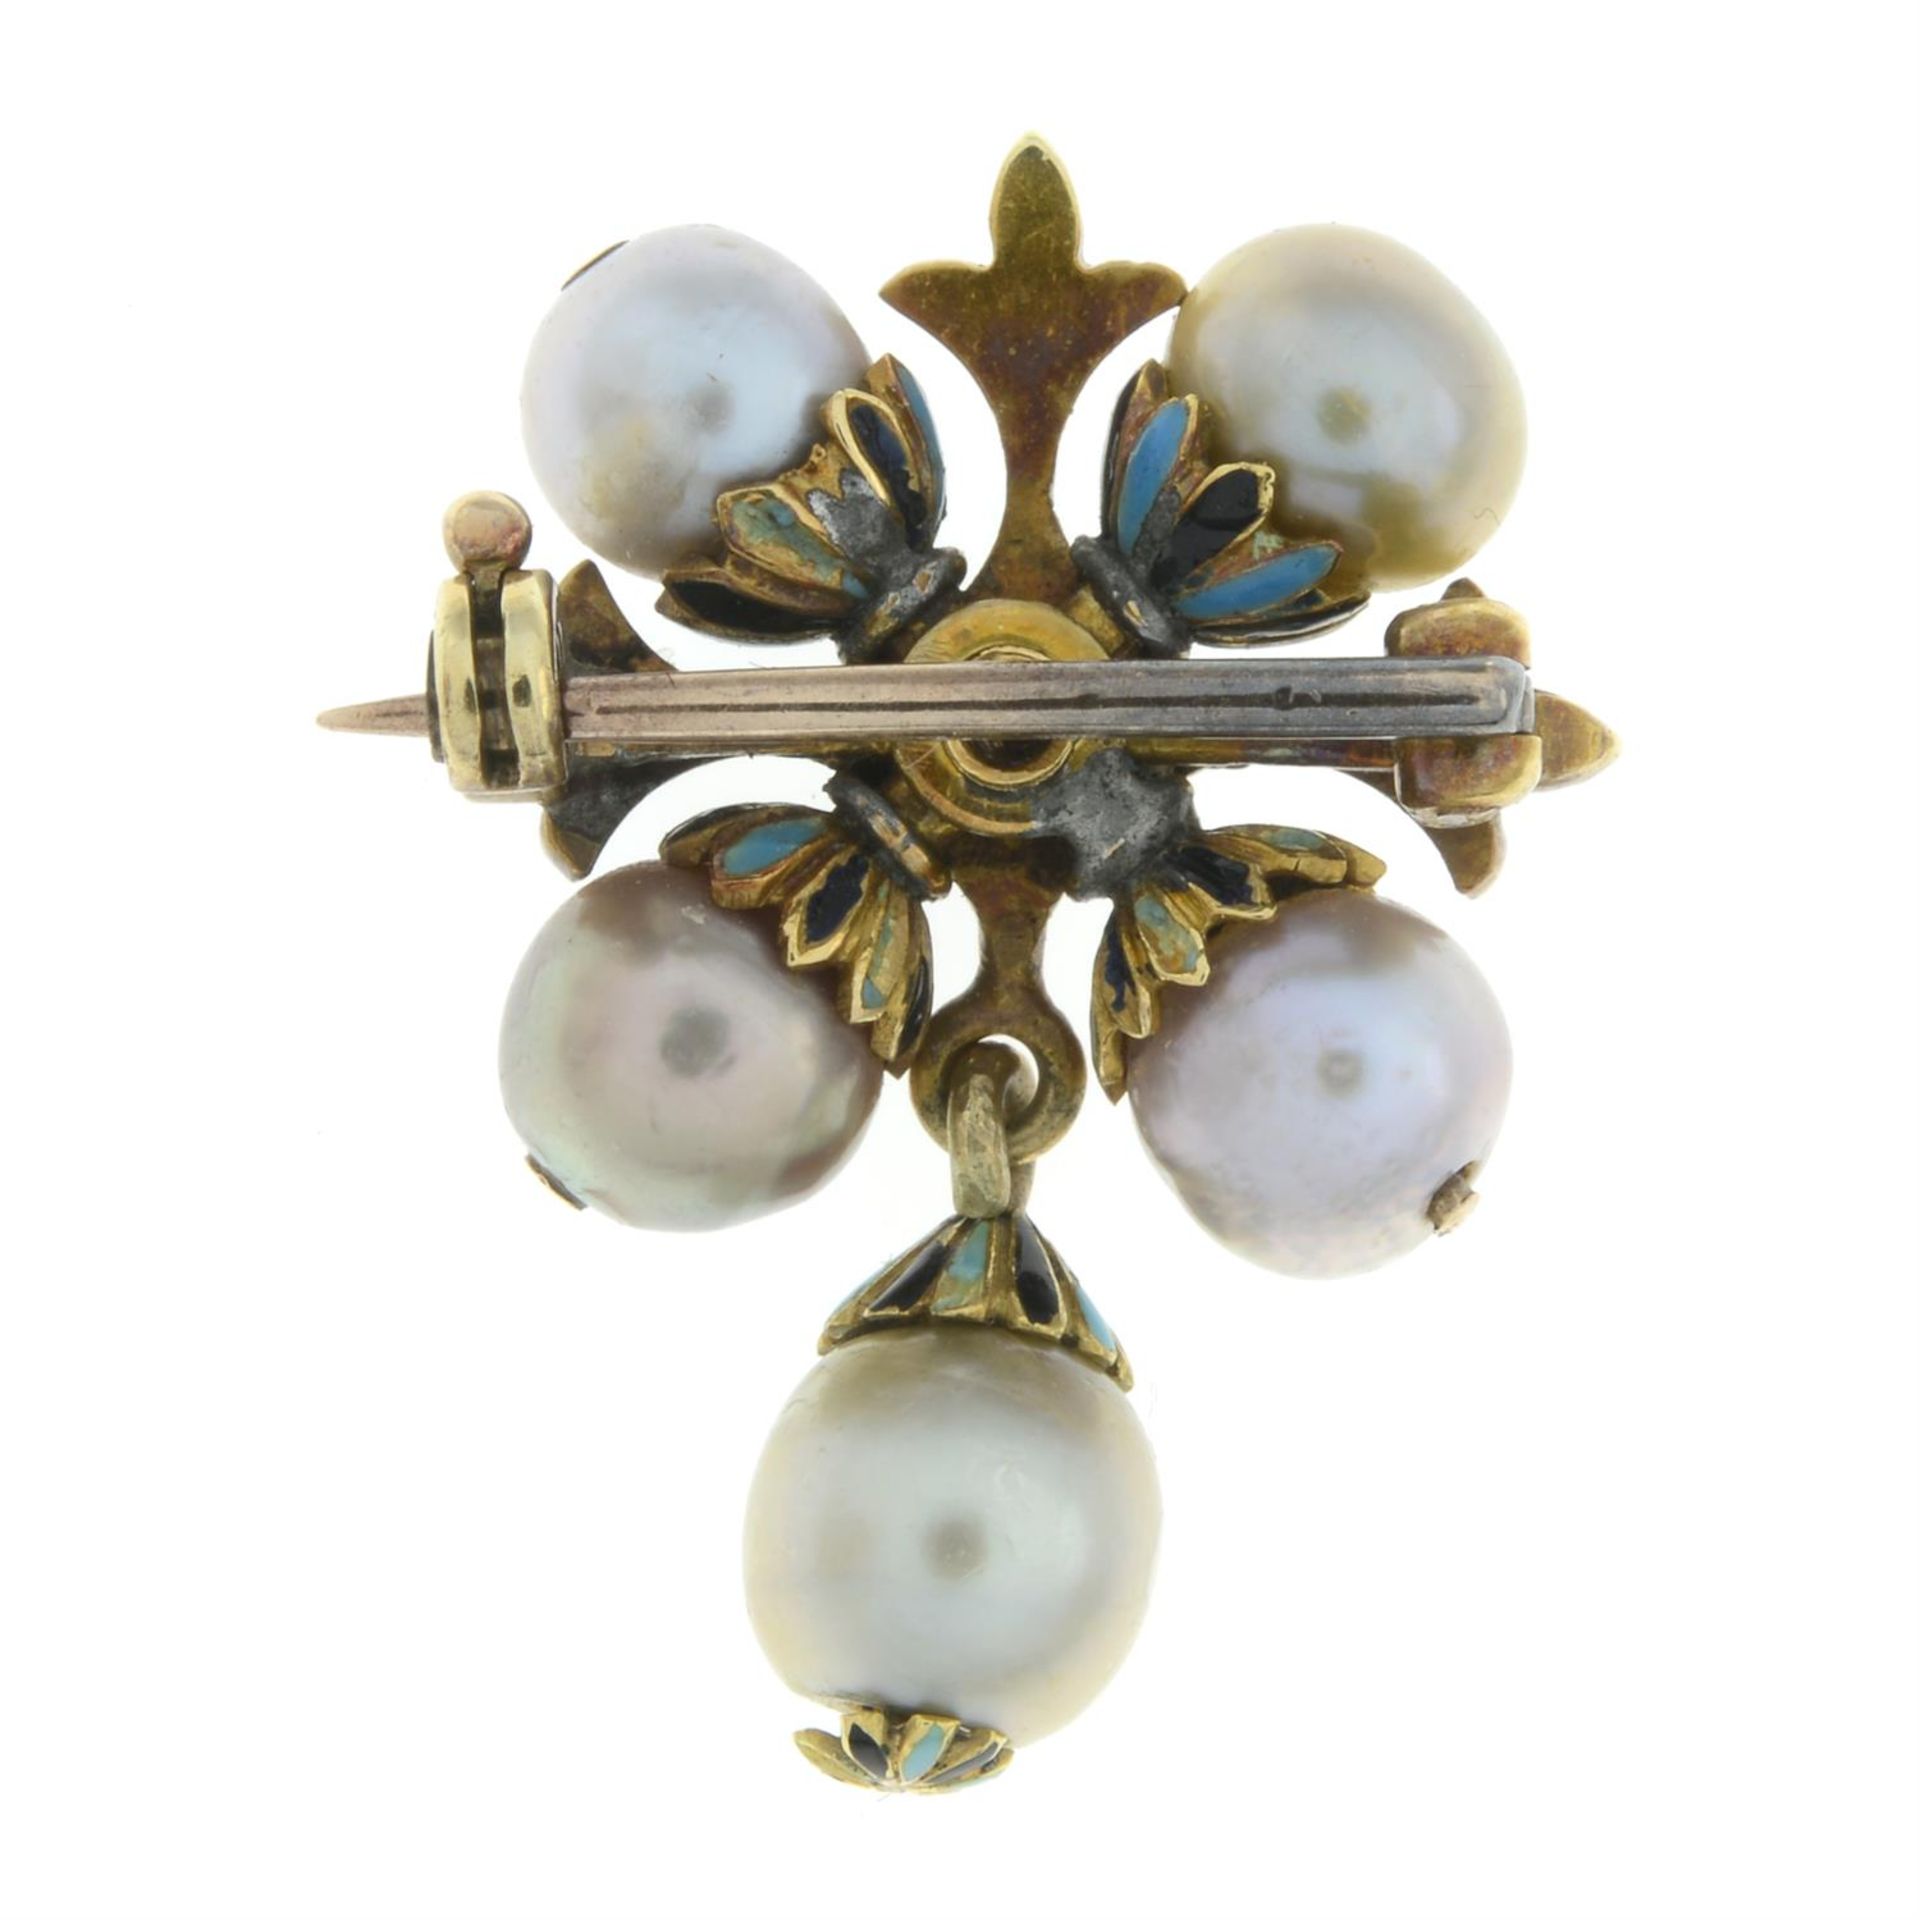 19th century gold diamond, pearl and enamel brooch - Image 3 of 4